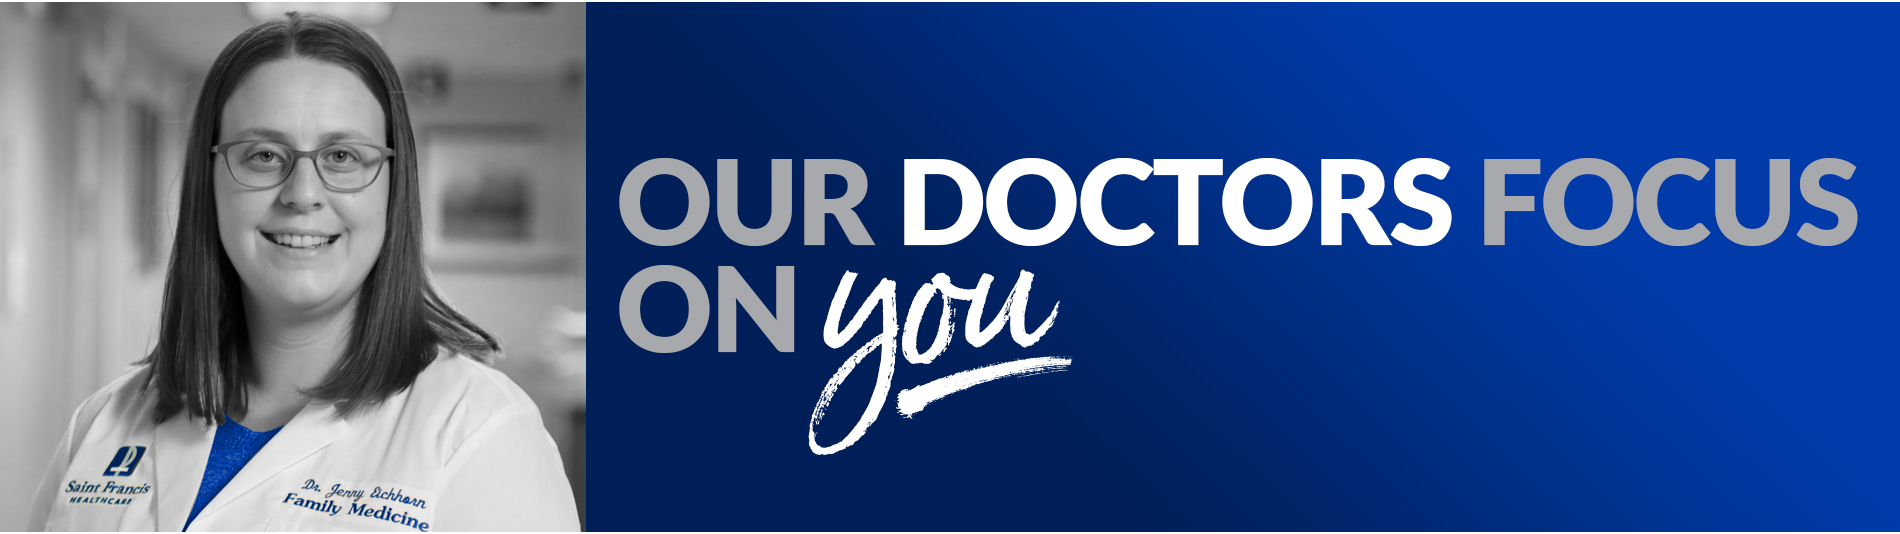 Our doctors focus on YOU!